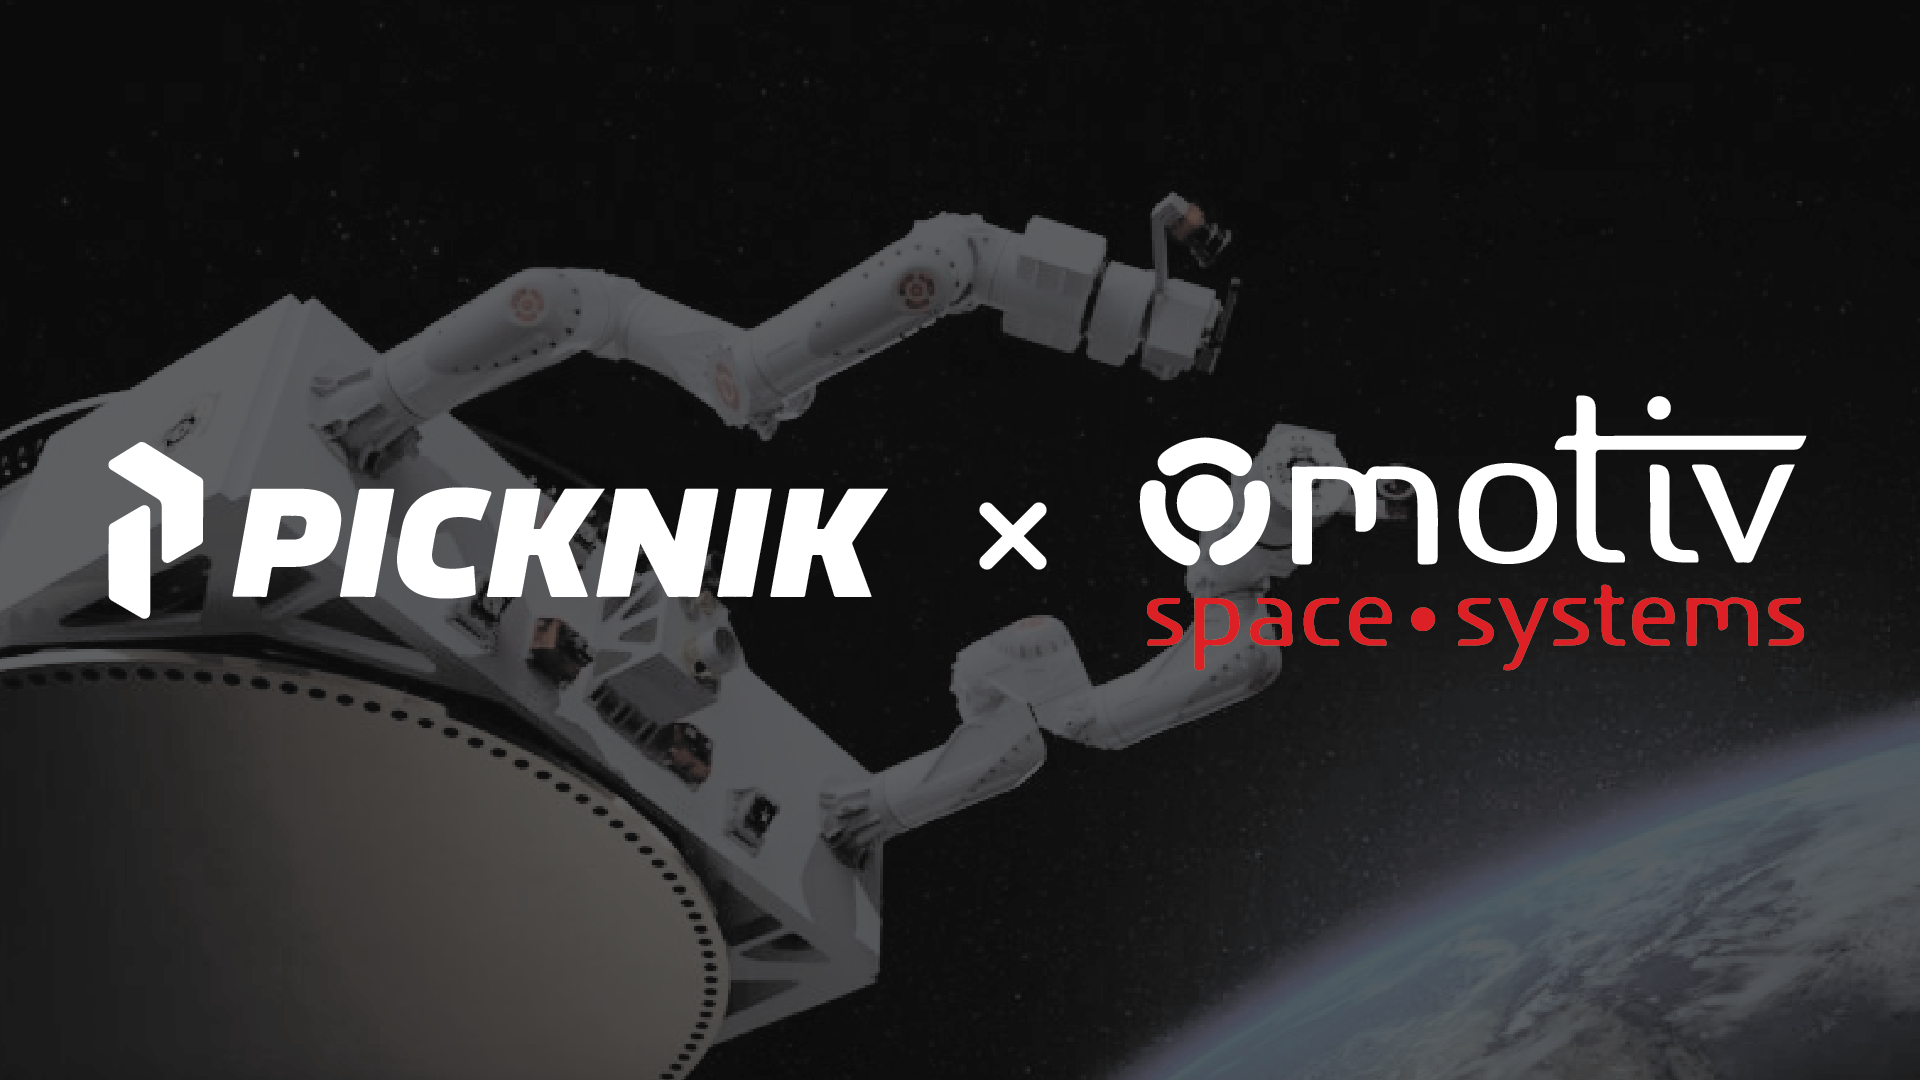 PickNik and Motiv are collaborating to improve robot arm performance for operations both inside and outside vehicles.